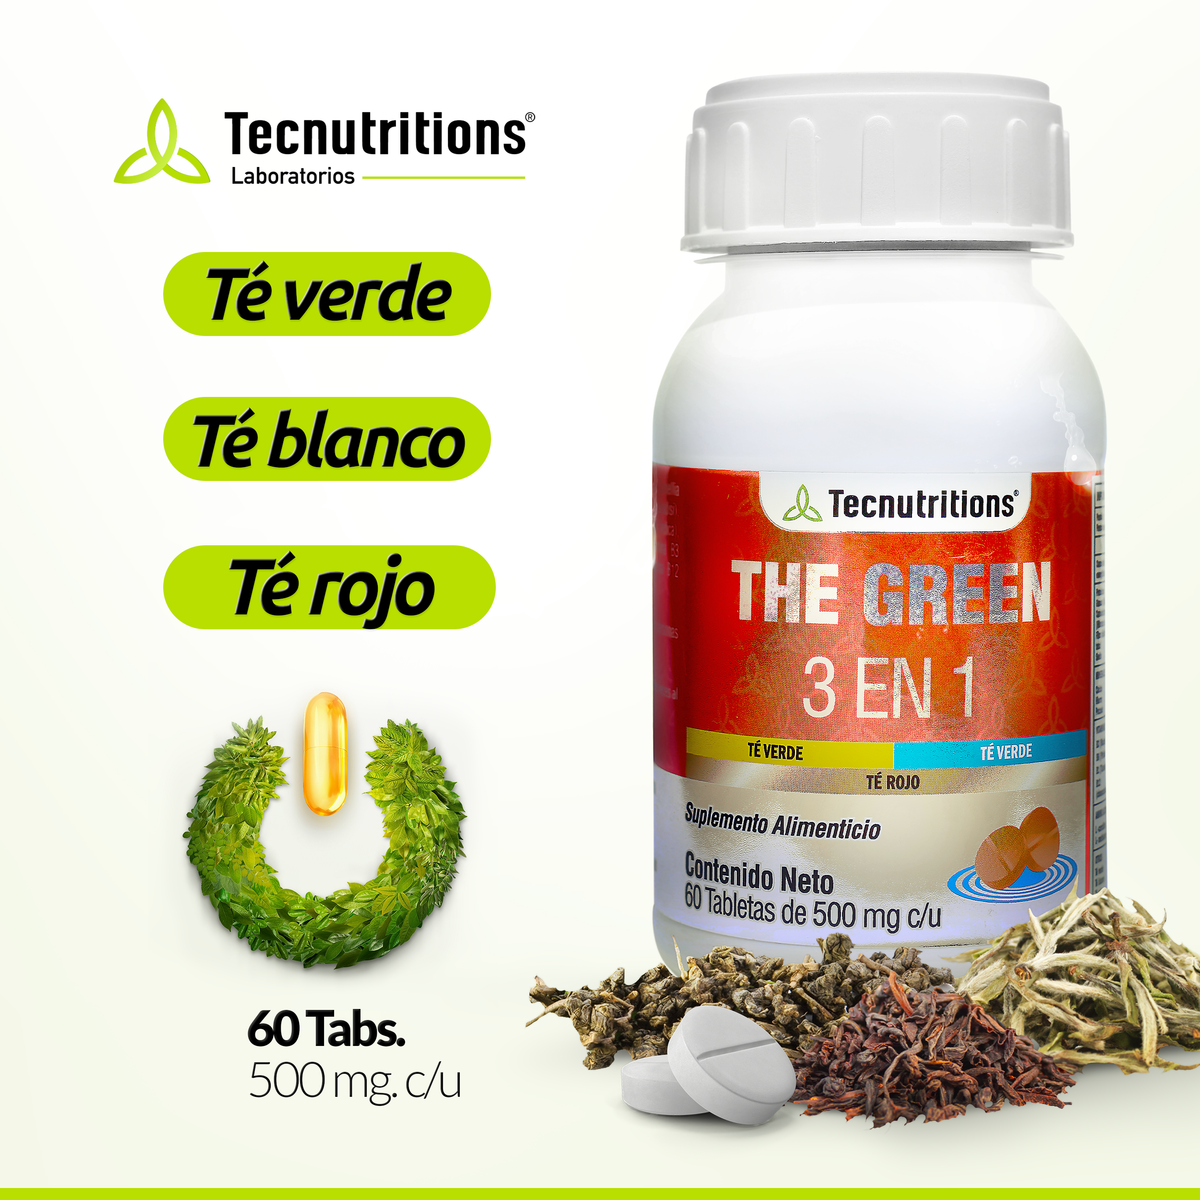 Food supplement with antioxidants, fibers and vitamins, The Green 3 in 1, 60 tabl